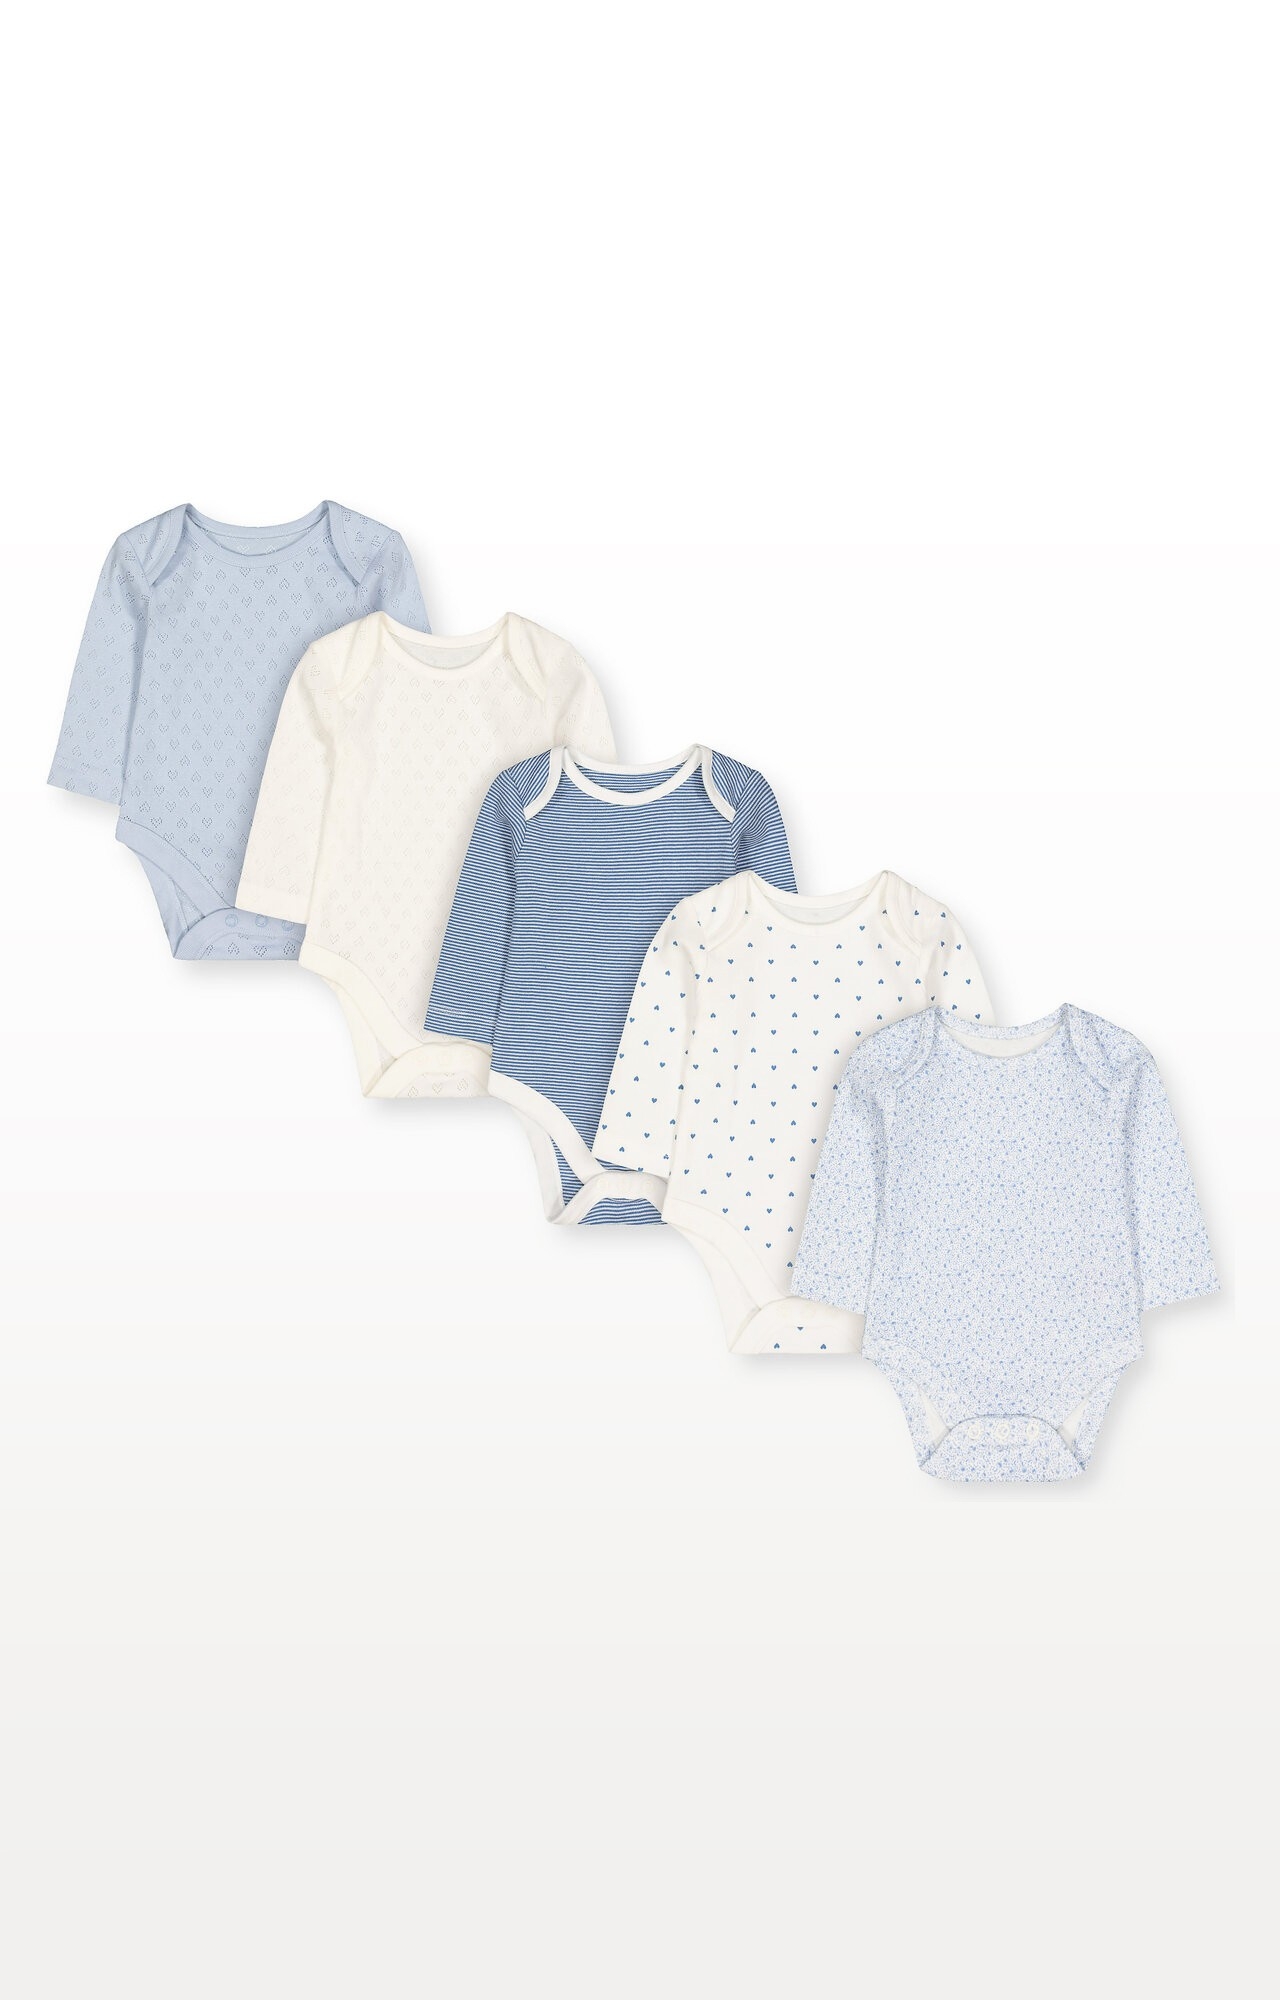 Mothercare | Pretty Blue and White Bodysuits - Pack of 5